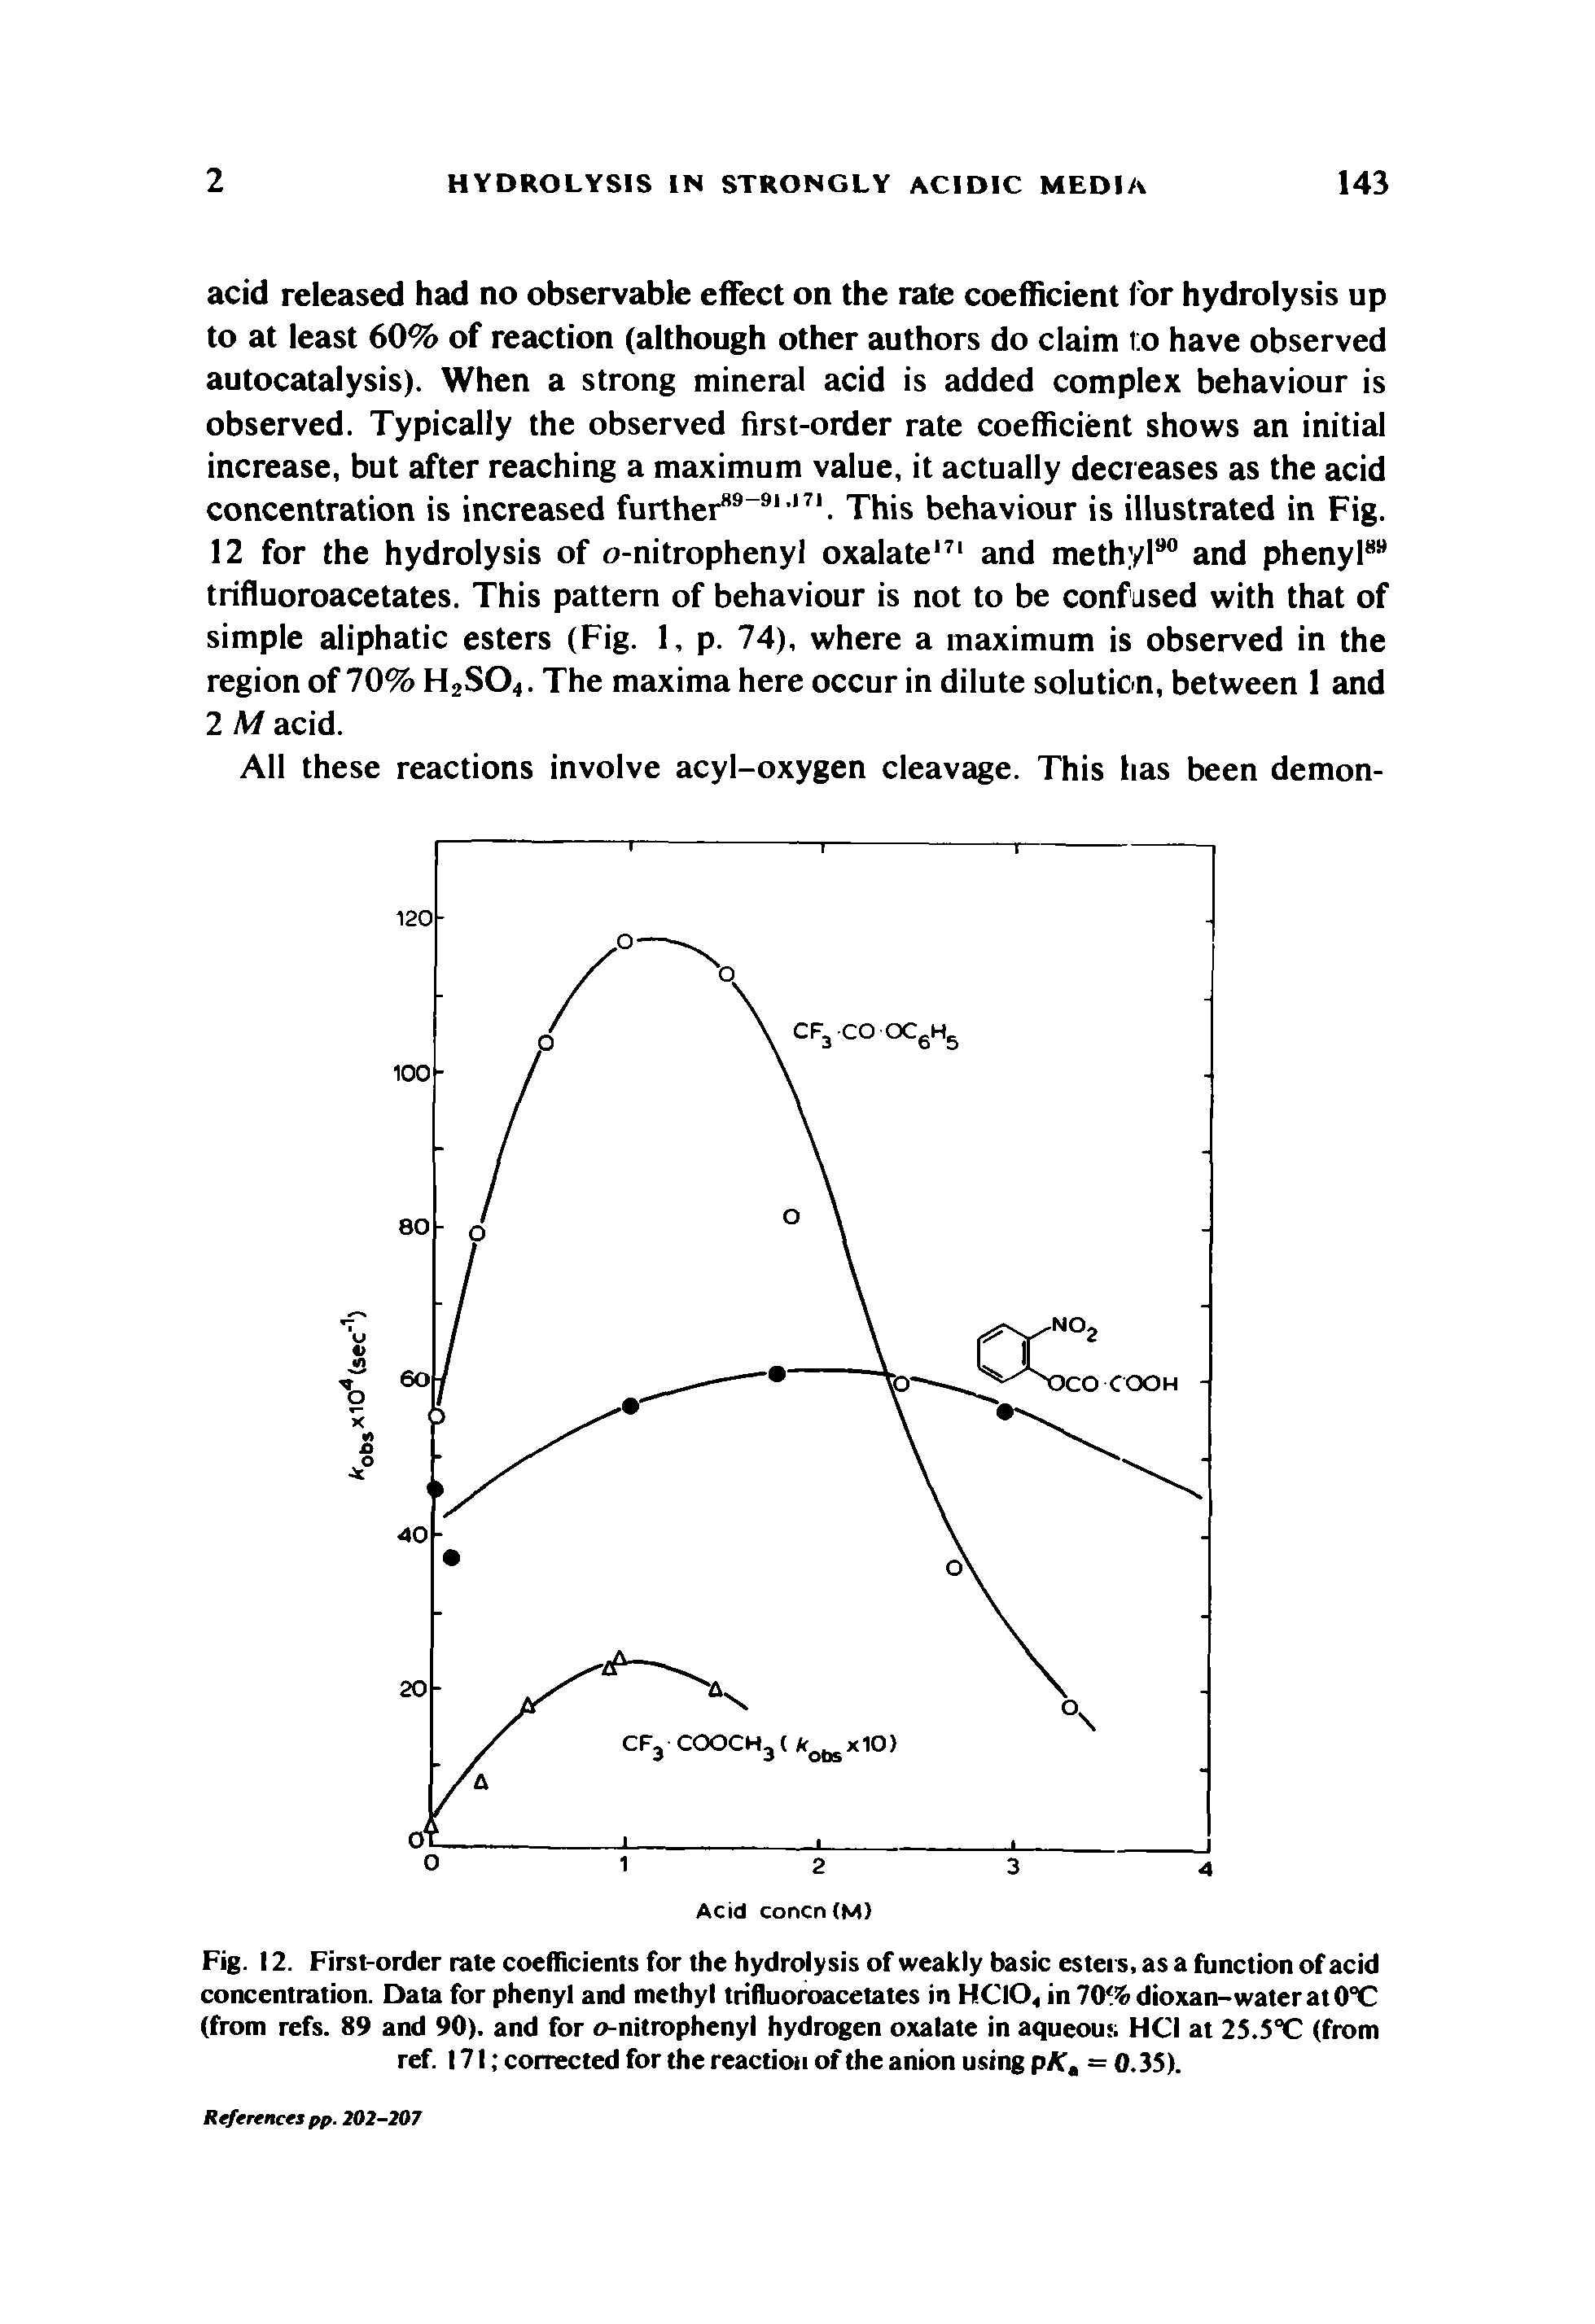 Fig. 12. First-order rate coefficients for the hydrolysis of weakly basic esters, as a function of acid concentration. Data for phenyl and methyl trifluoroacetates in HCIO, in 70% dioxan-water at 0°C (from refs. 89 and 90). and for o-nitrophenyl hydrogen oxalate in aqueous HCI at 25.5°C (from ref. 171 corrected for the reaction of the anion using pA", = 0.35).